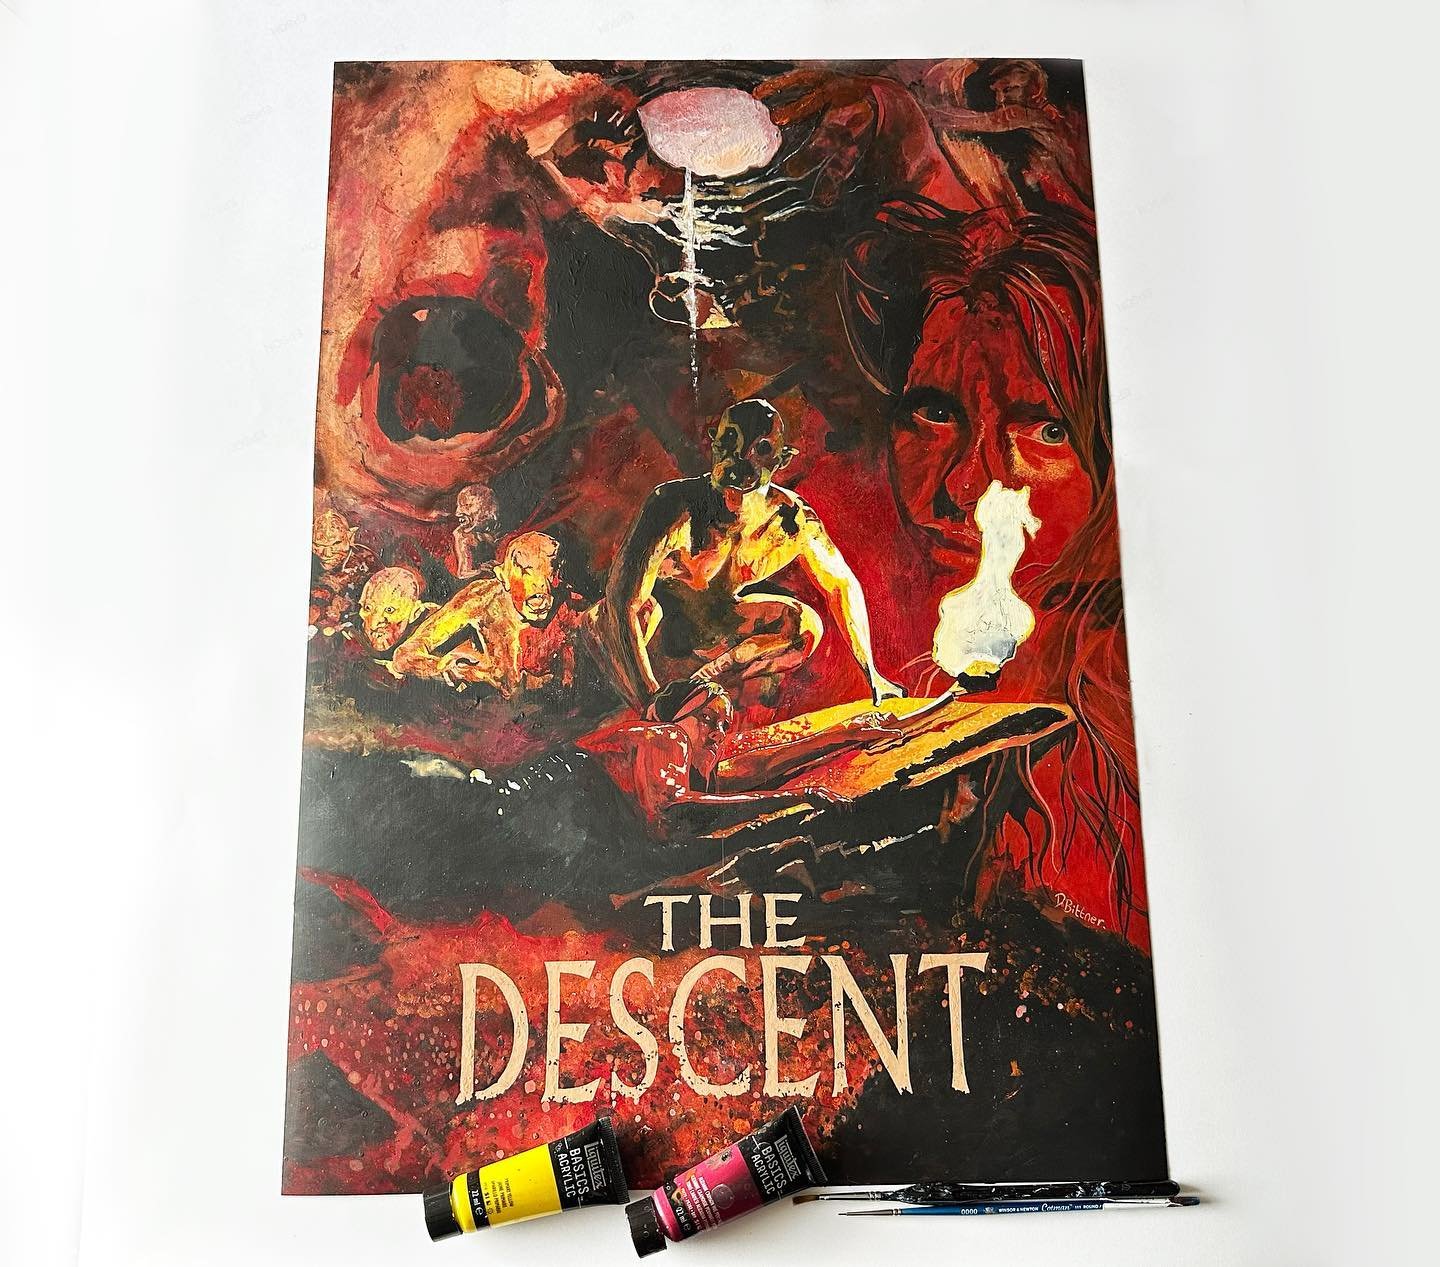 Original Descent painting now available in my store - launch offer active for the next couple of days! 

Hand painted using acrylic on paper (42 x 59.4cm in size). FREE worldwide shipping. 

Link to website in bio! 

#thedescent #descent #horrorfilm 